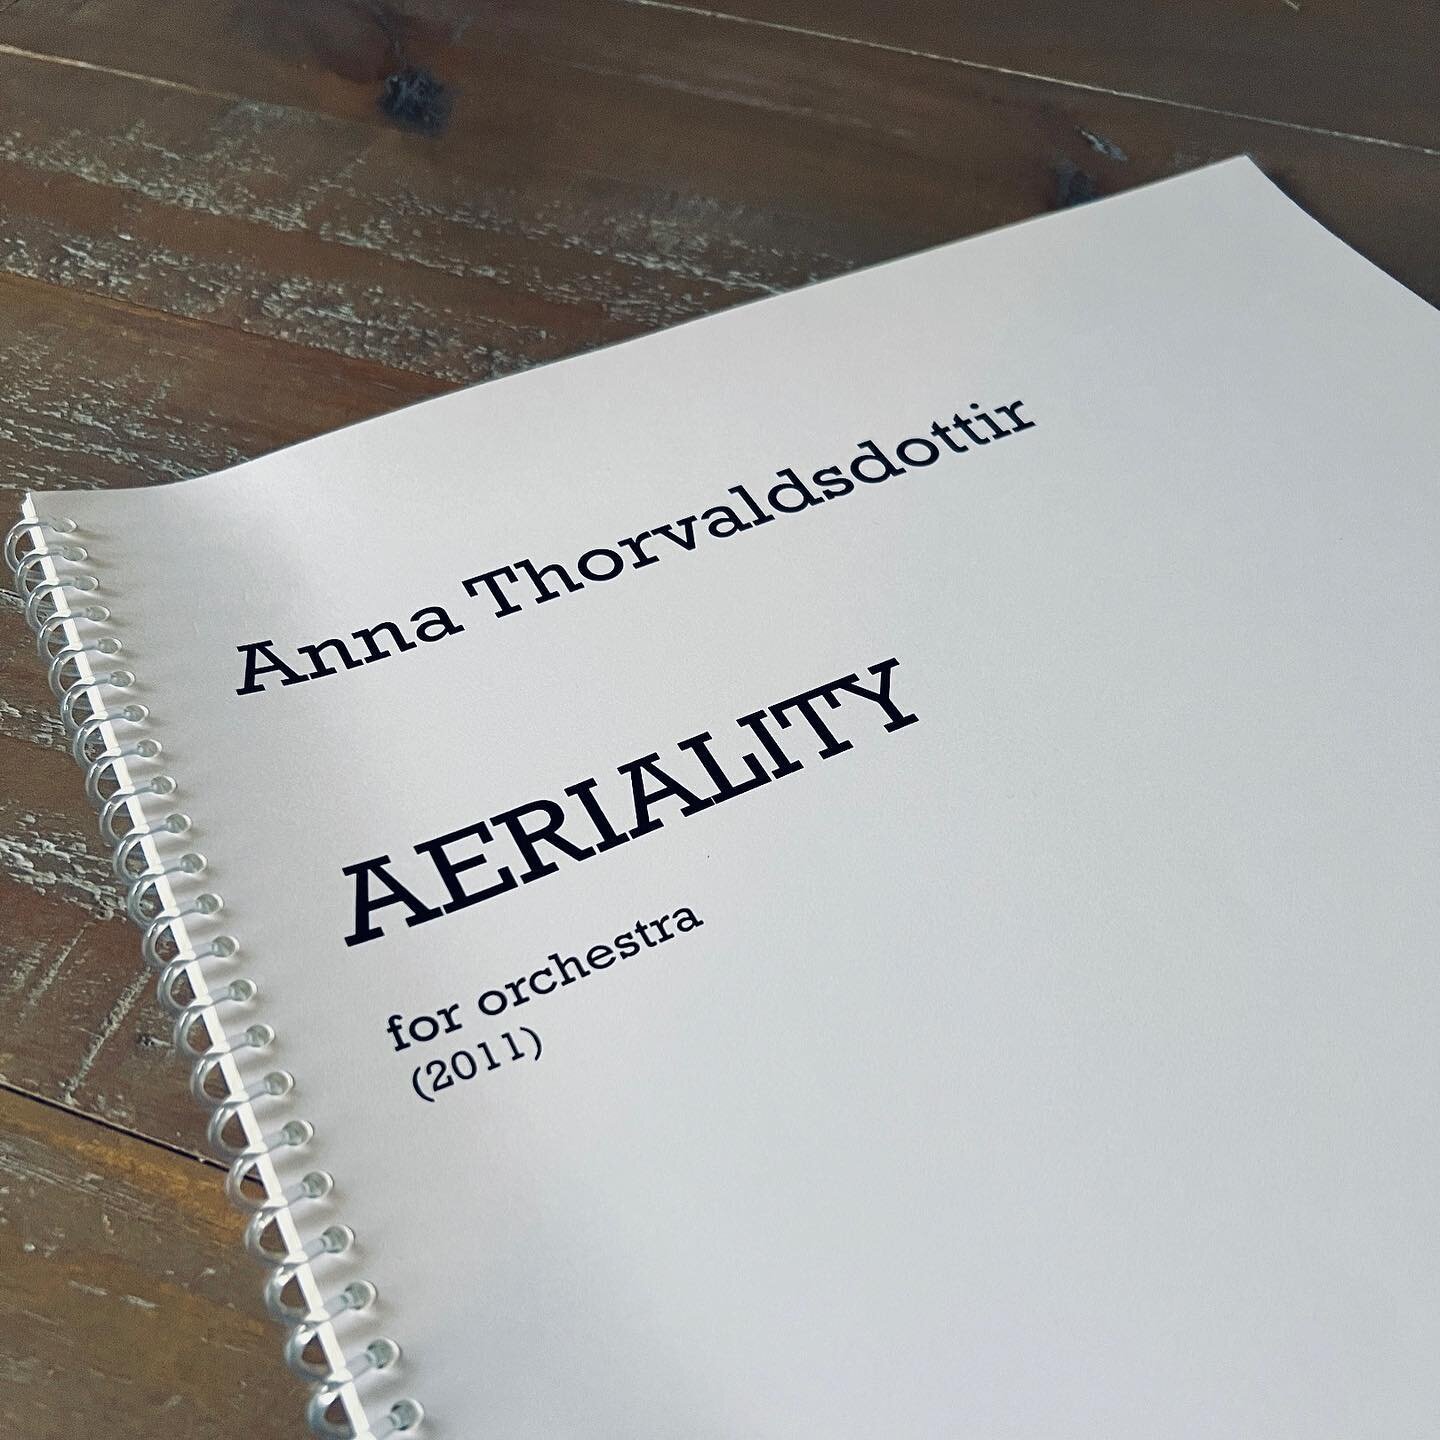 Anna&rsquo;s AERIALITY has been performed by more than 40 orchestras in 15 different countries, with over a 100 performances total - including the New York Philharmonic, LA Philharmonic, NDR Elbphilharmonie Orchester, BBC Symphony Orchestra, Philharm